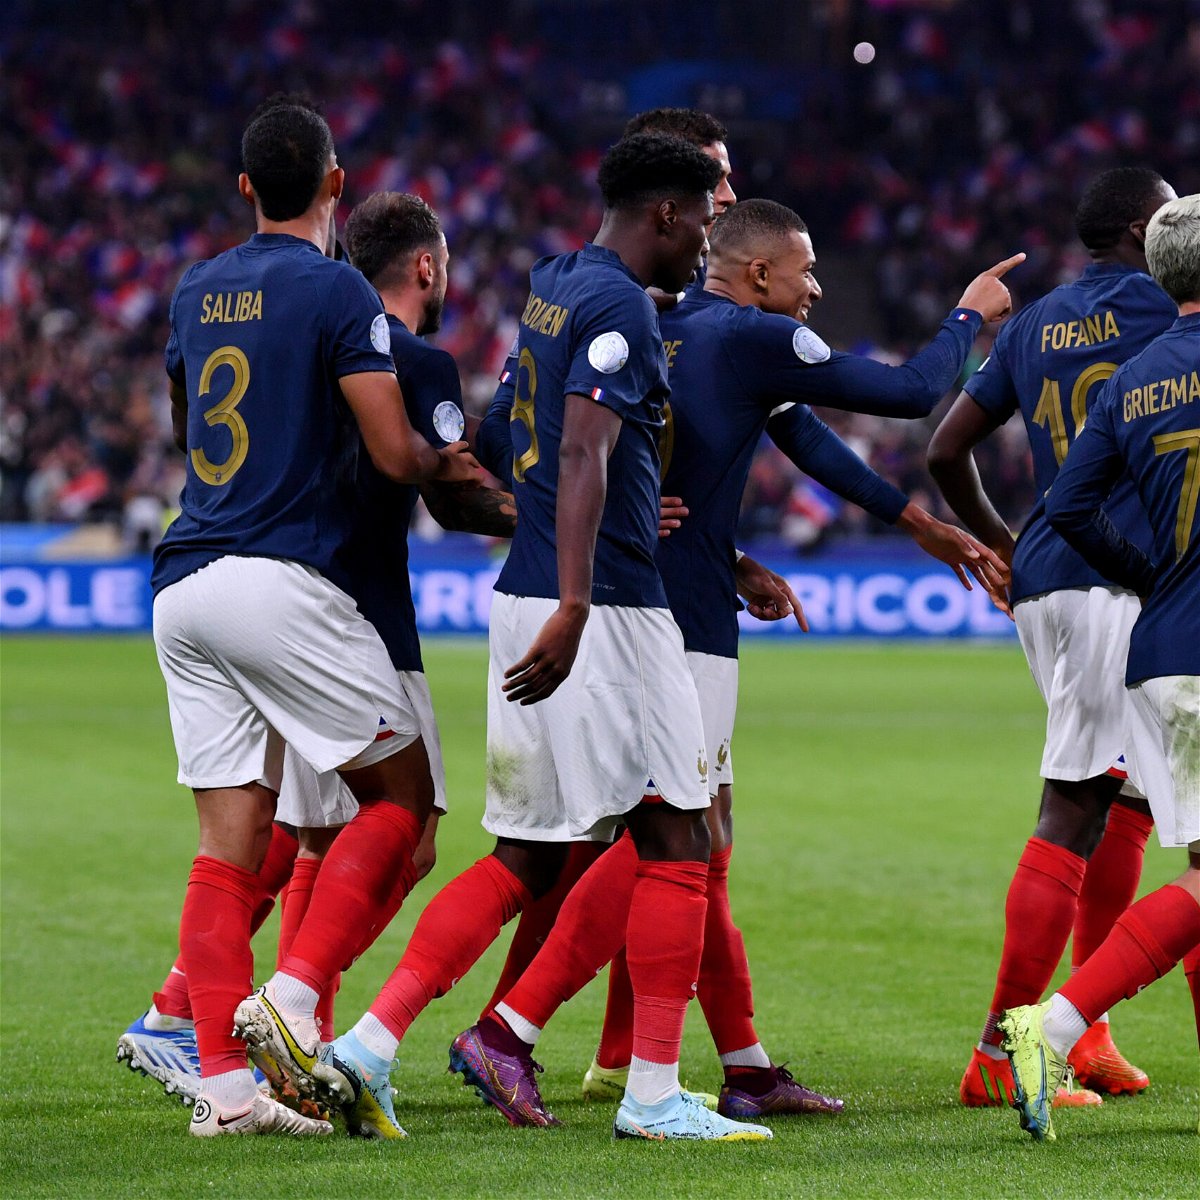 World Cup 2022: France's squad depth is scary even without Kante or Pogba